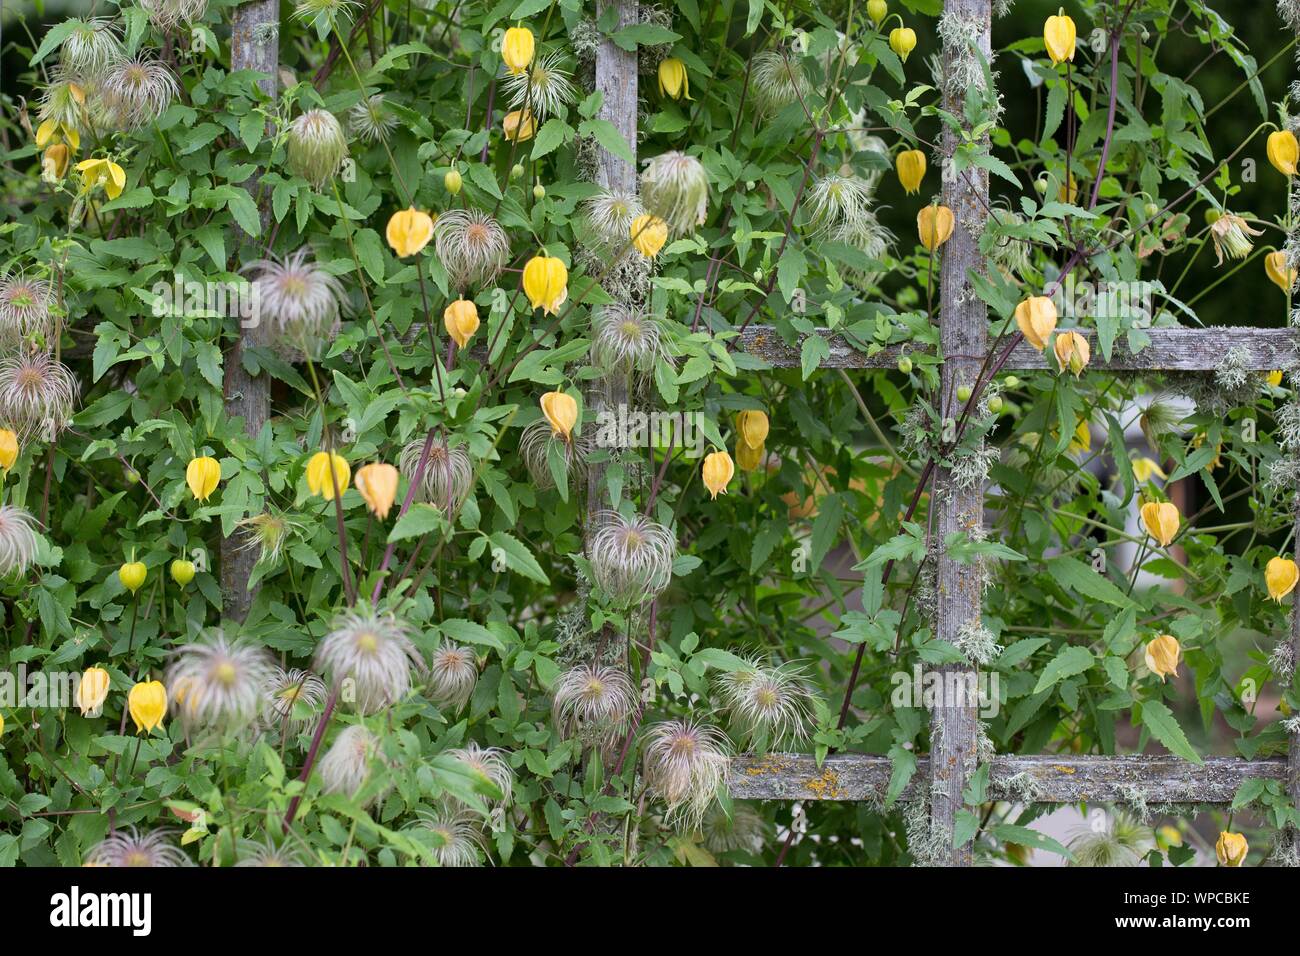 Lattice covered with dying clematis and ground cherries, at the Oregon Garden in Silverton, OR, USA. Stock Photo